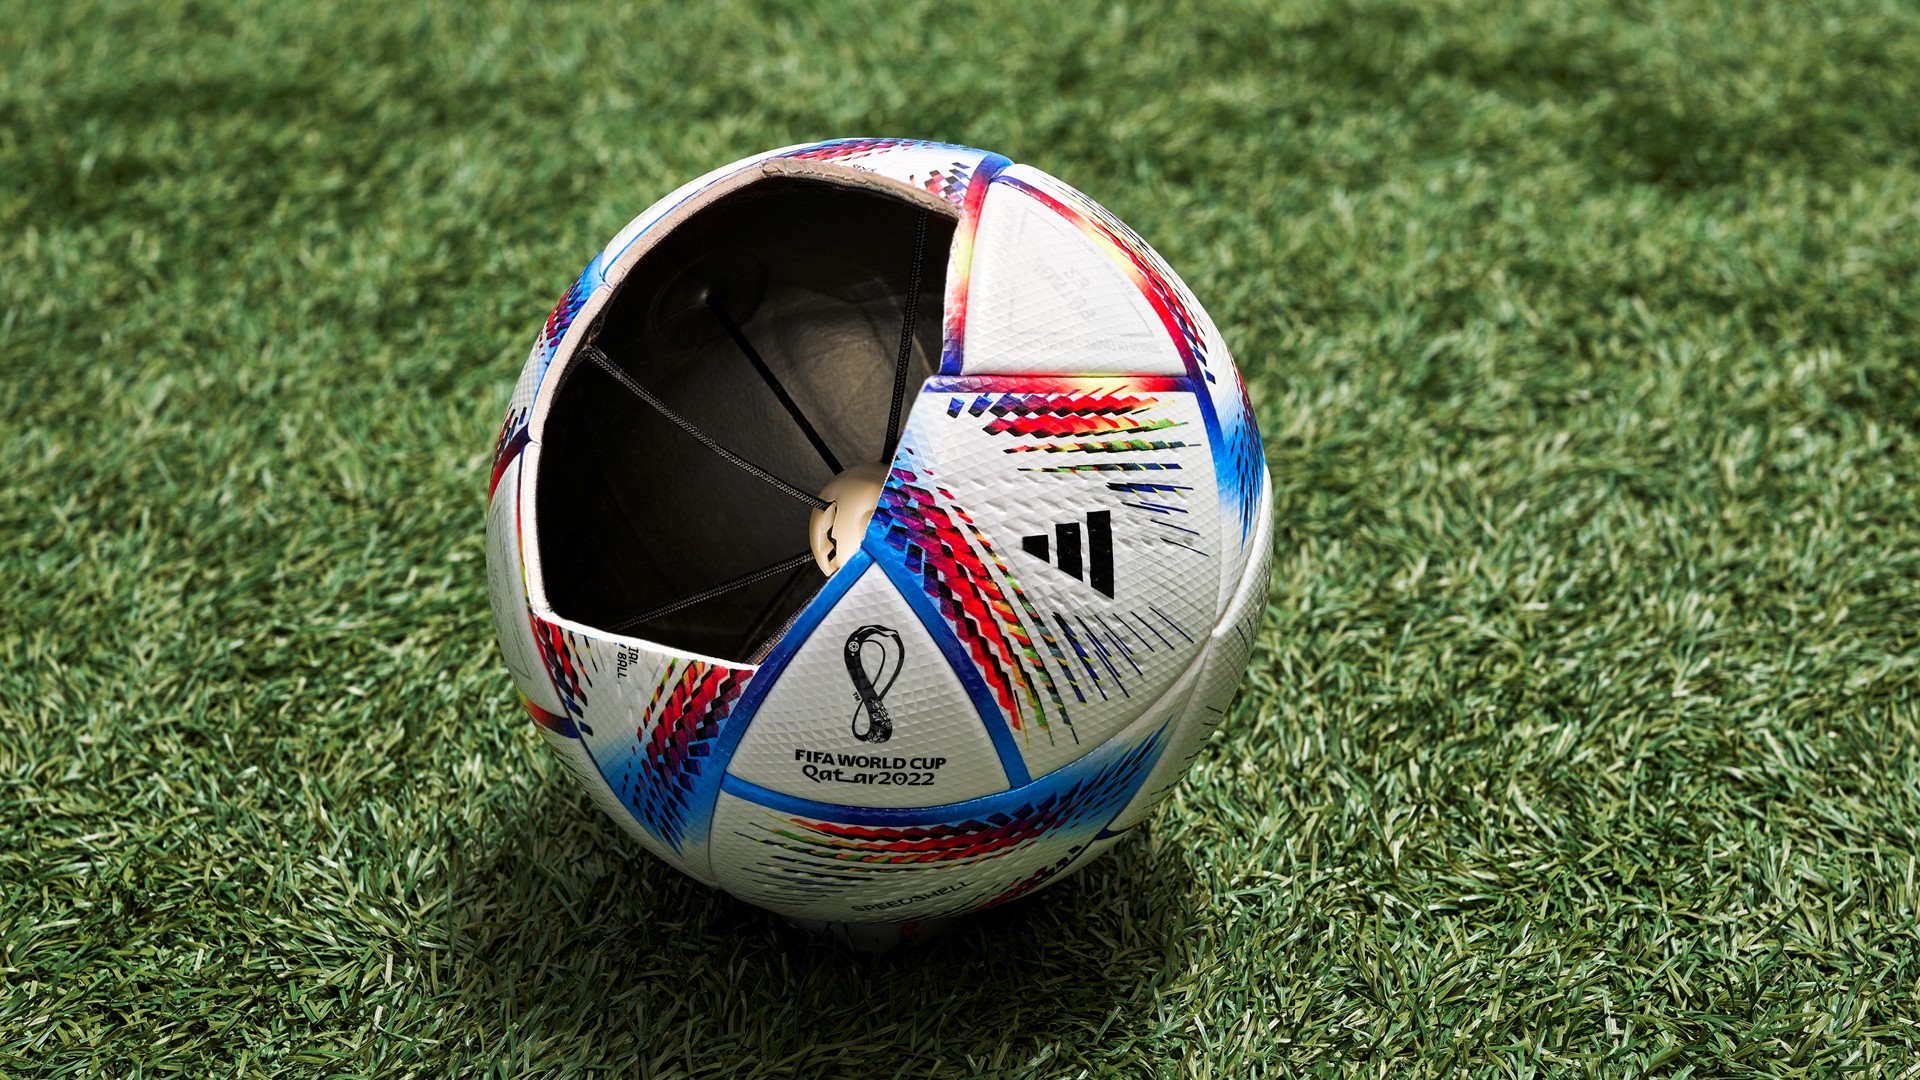 This new ball is changing the game of soccer